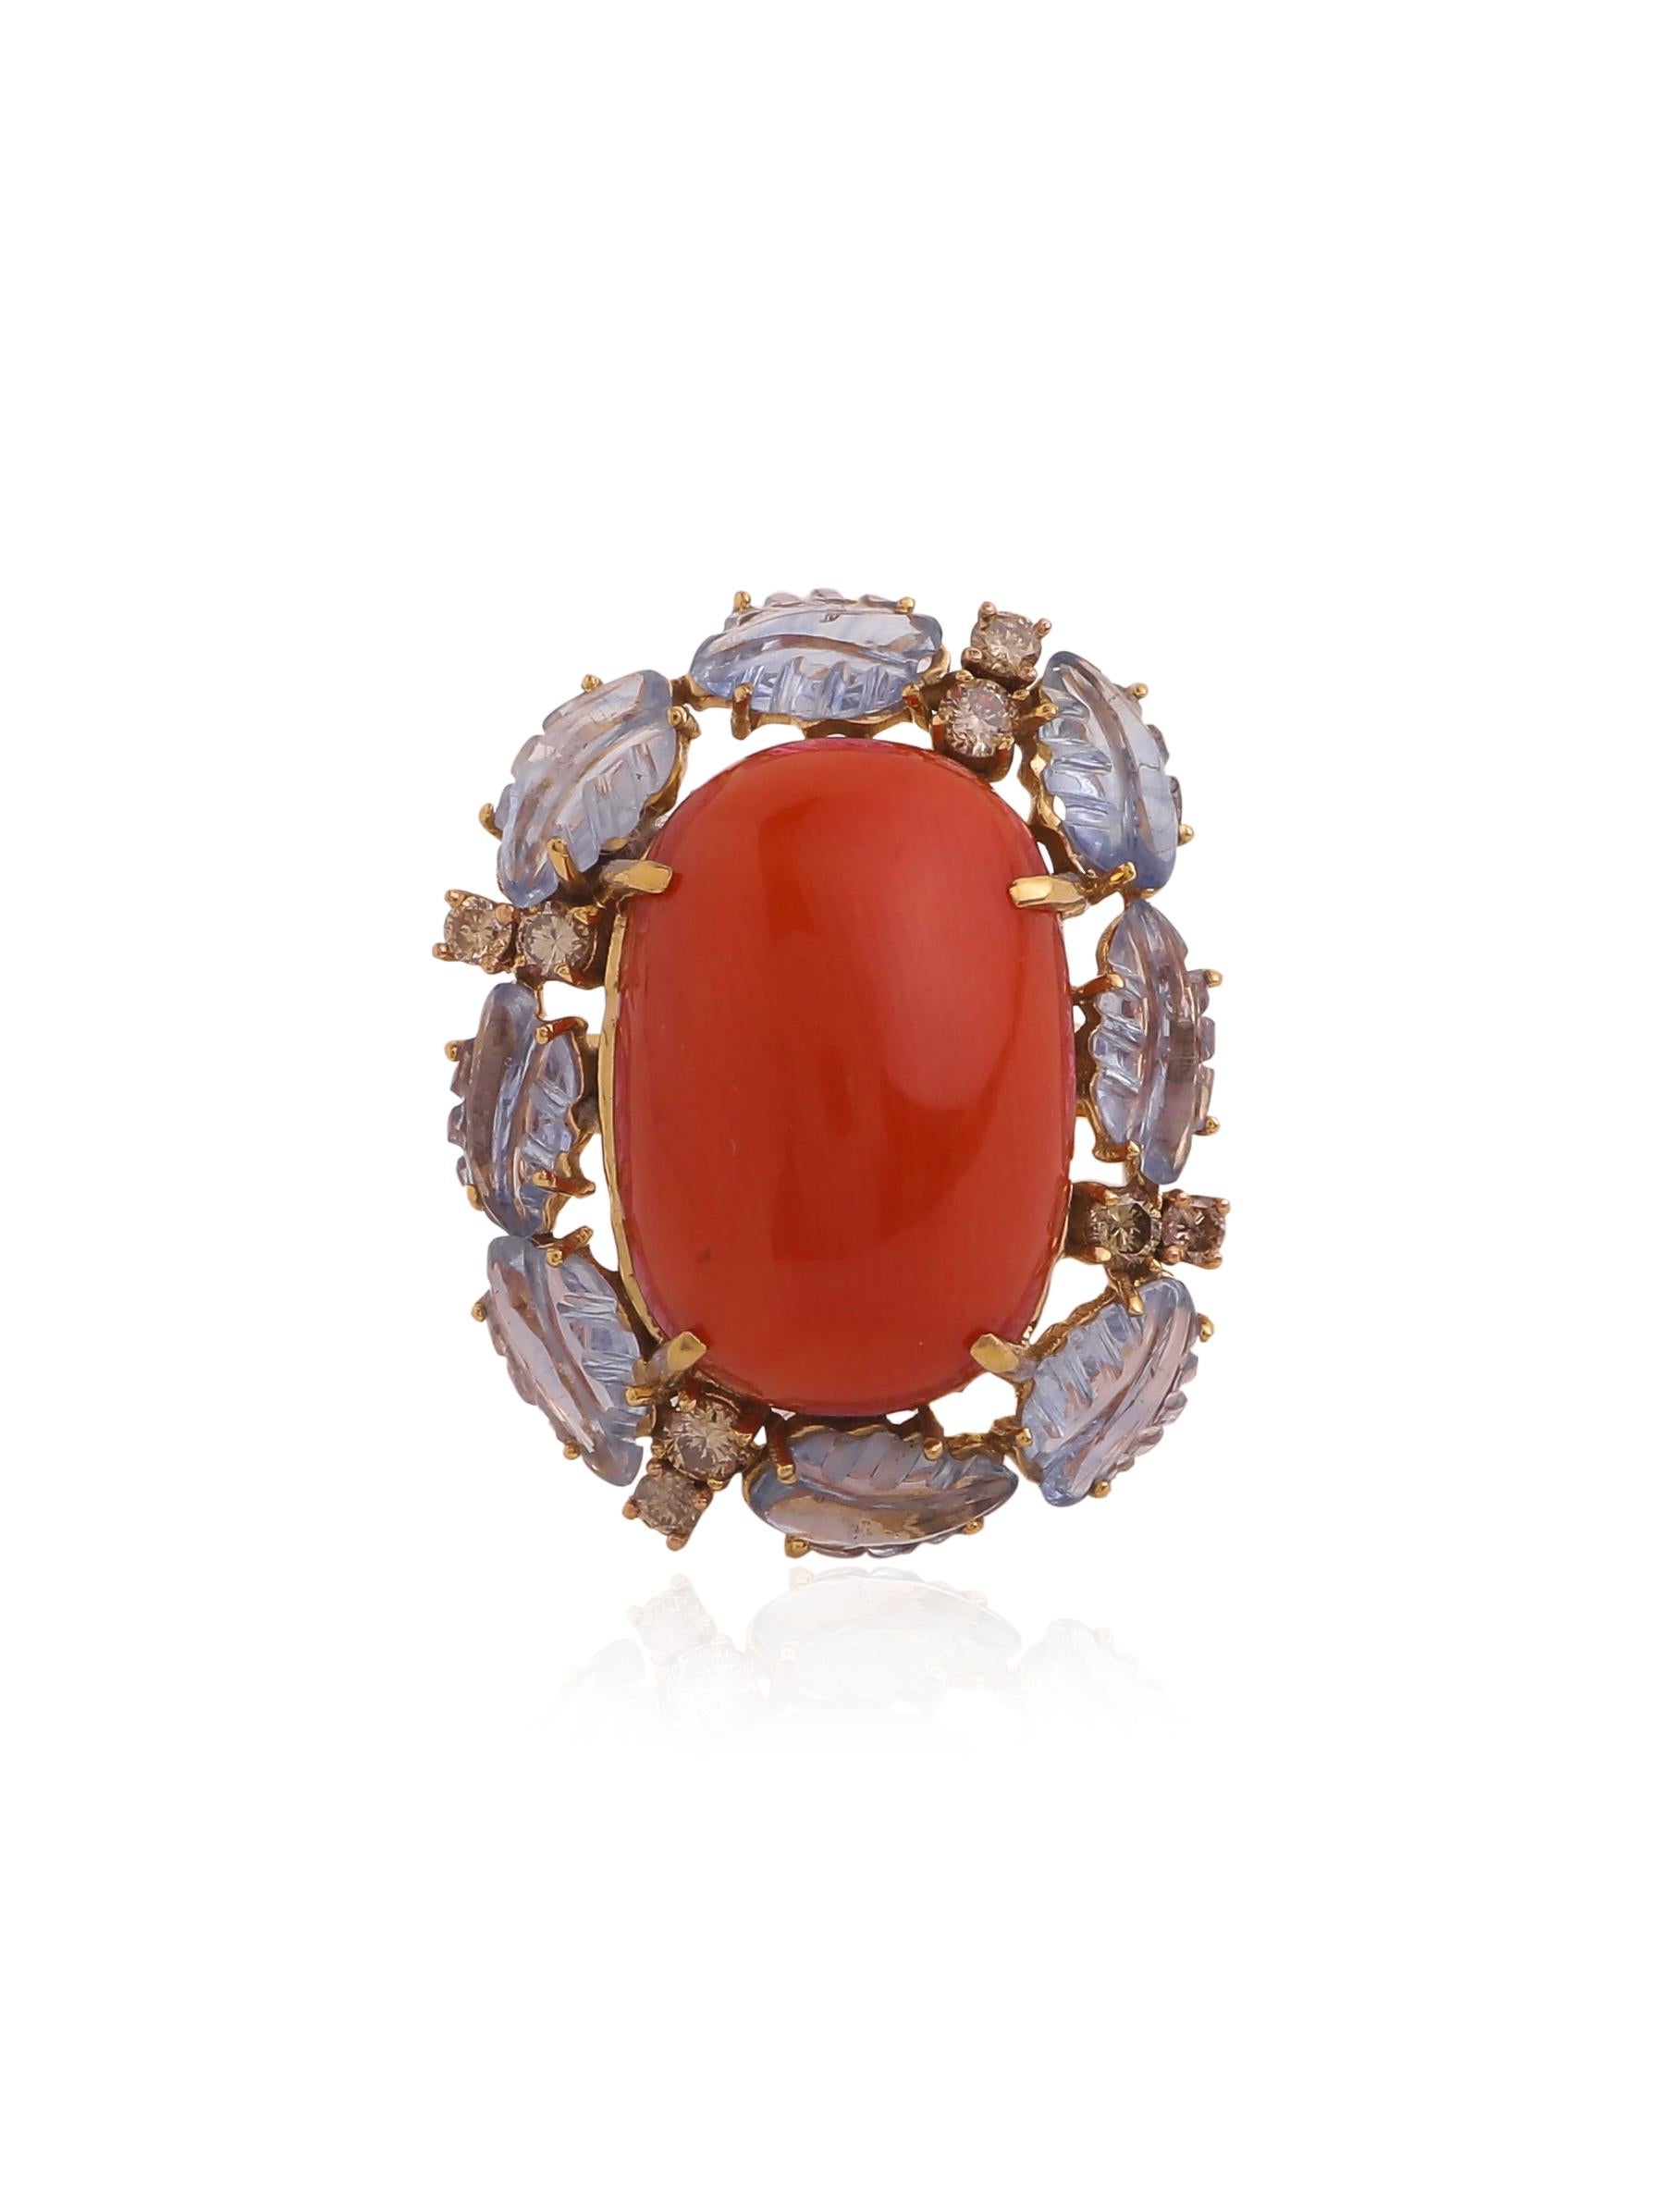 A cocktail ring with a big coral in the centre and a row of sapphire carved leaves and diamonds on the side.
The Coral and the sapphires compliment each other and the brown diamonds blend in yet gives the ring a good shine. 
The ring is inspired